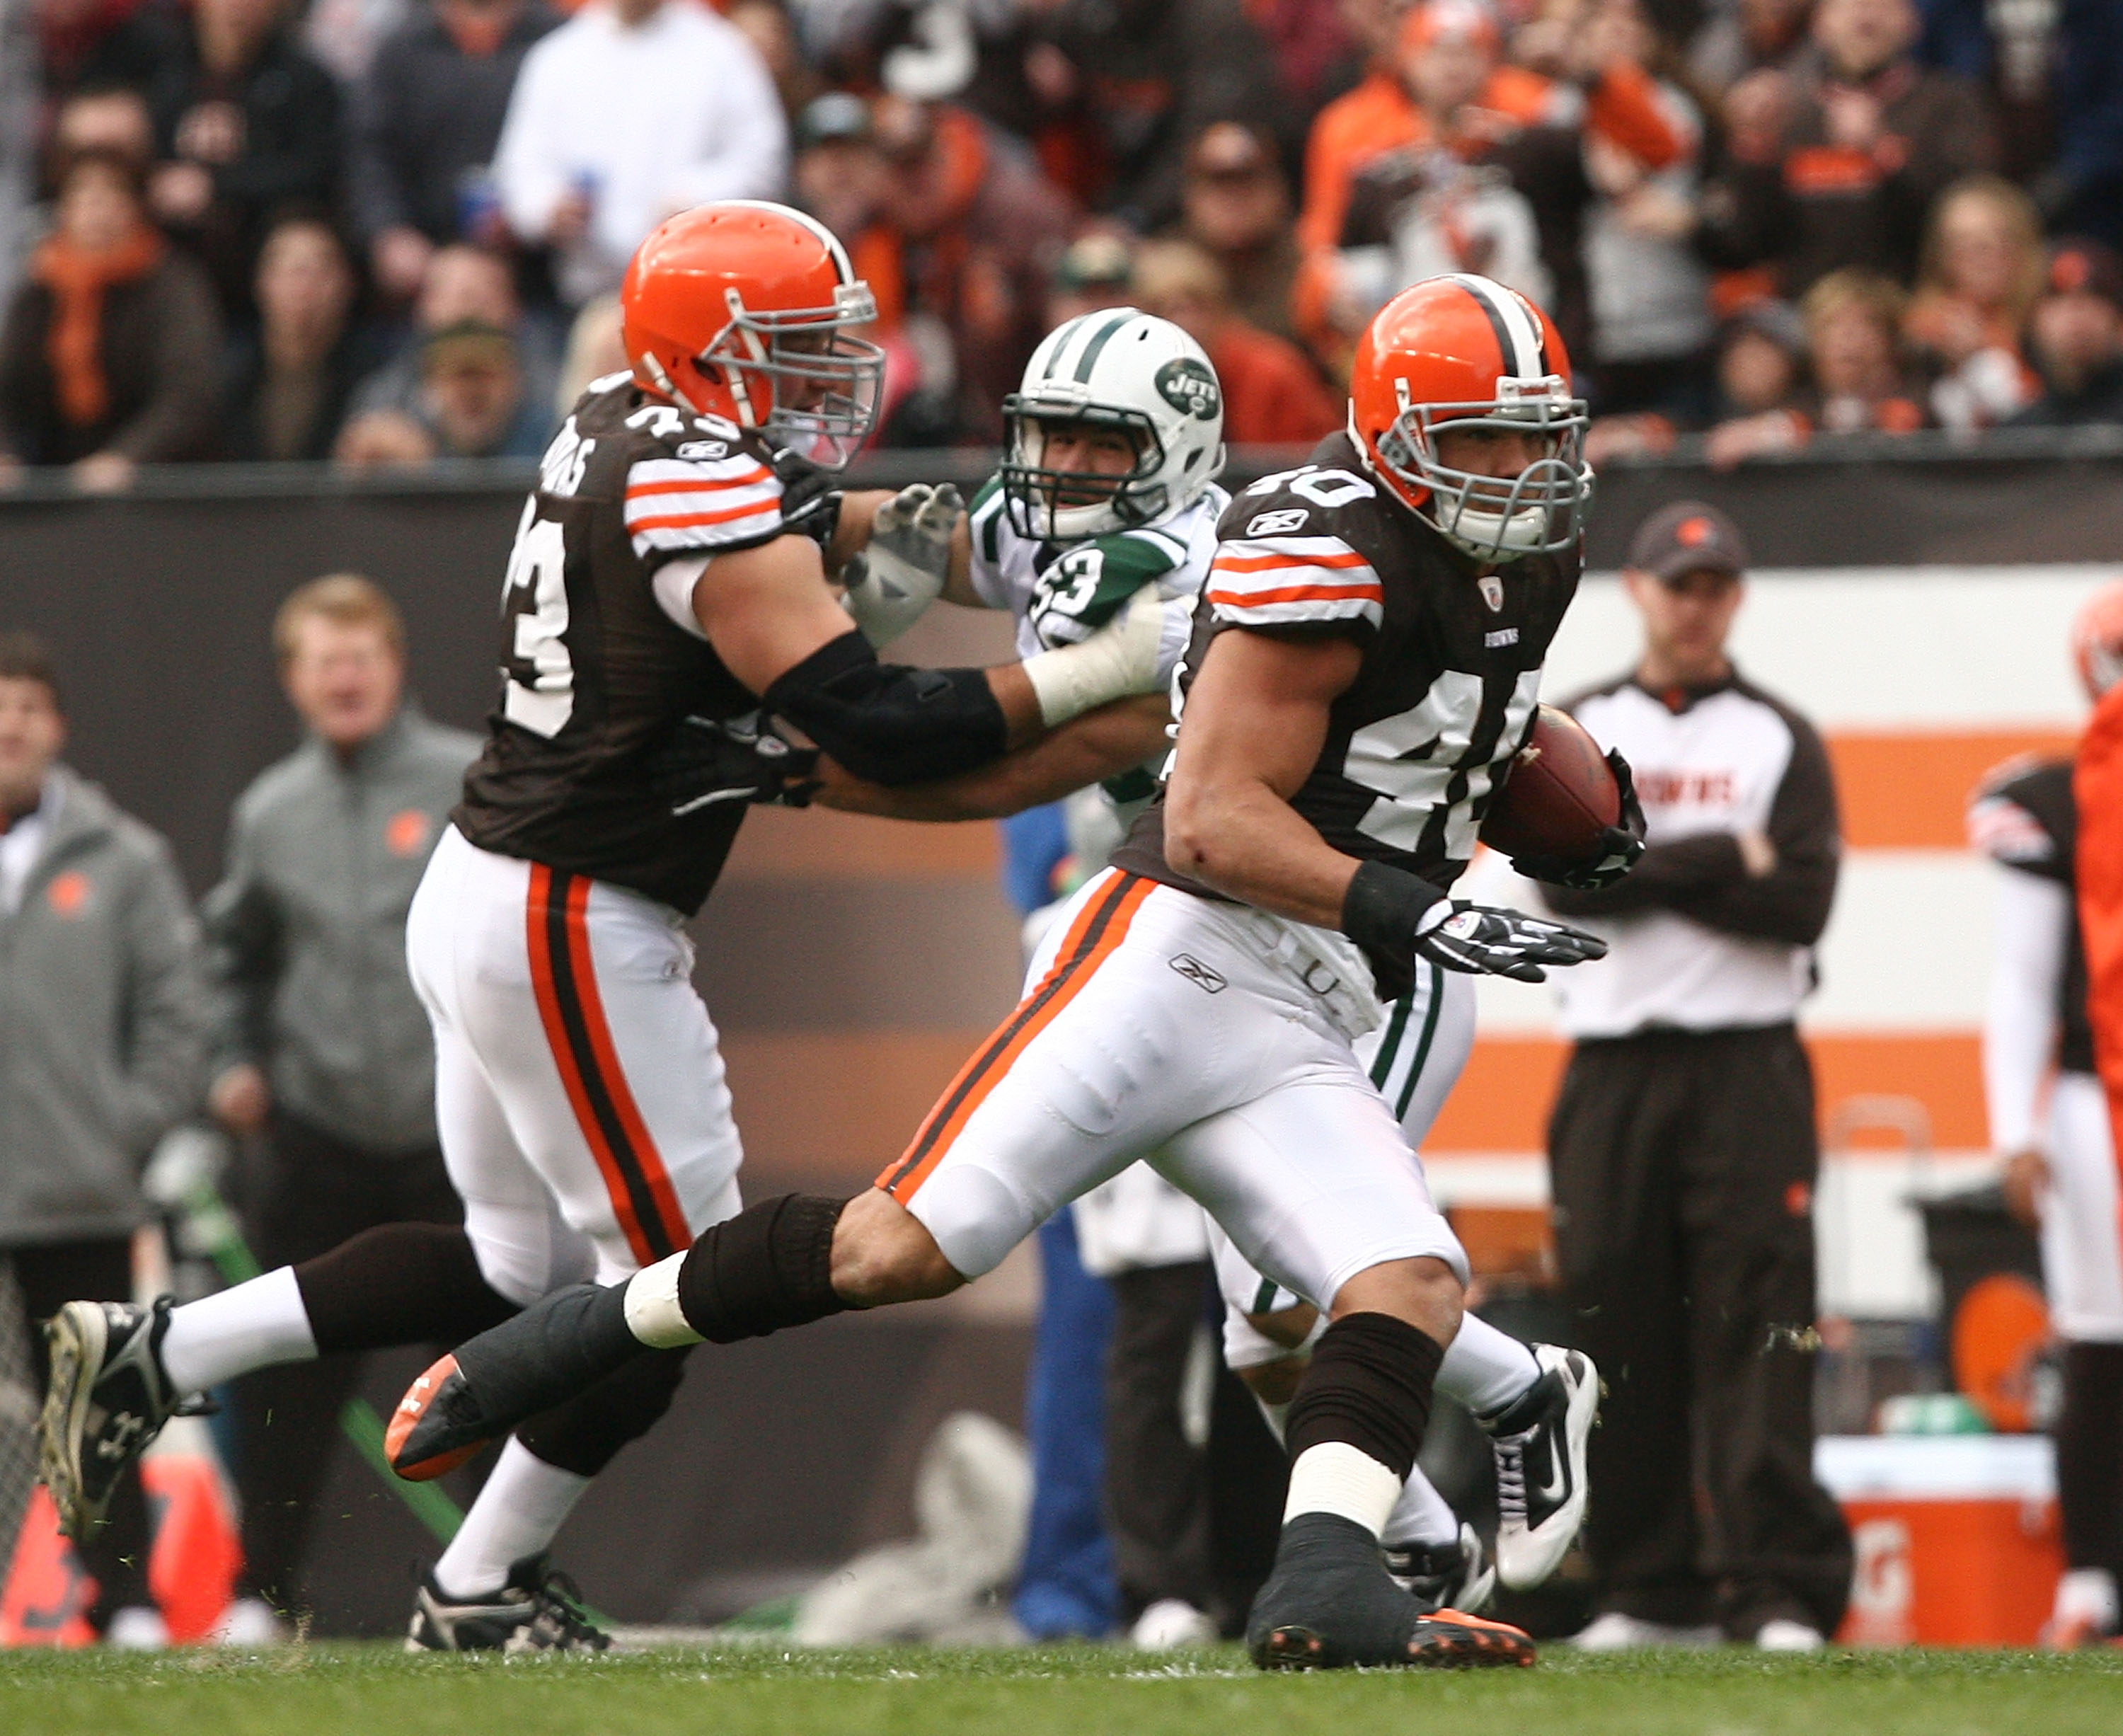 CLEVELAND - NOVEMBER 14:  Tailback Peyton Hillis #40 of the Cleveland Browns runs the ball against the New York Jets at Cleveland Browns Stadium on November 14, 2010 in Cleveland, Ohio.  (Photo by Matt Sullivan/Getty Images)